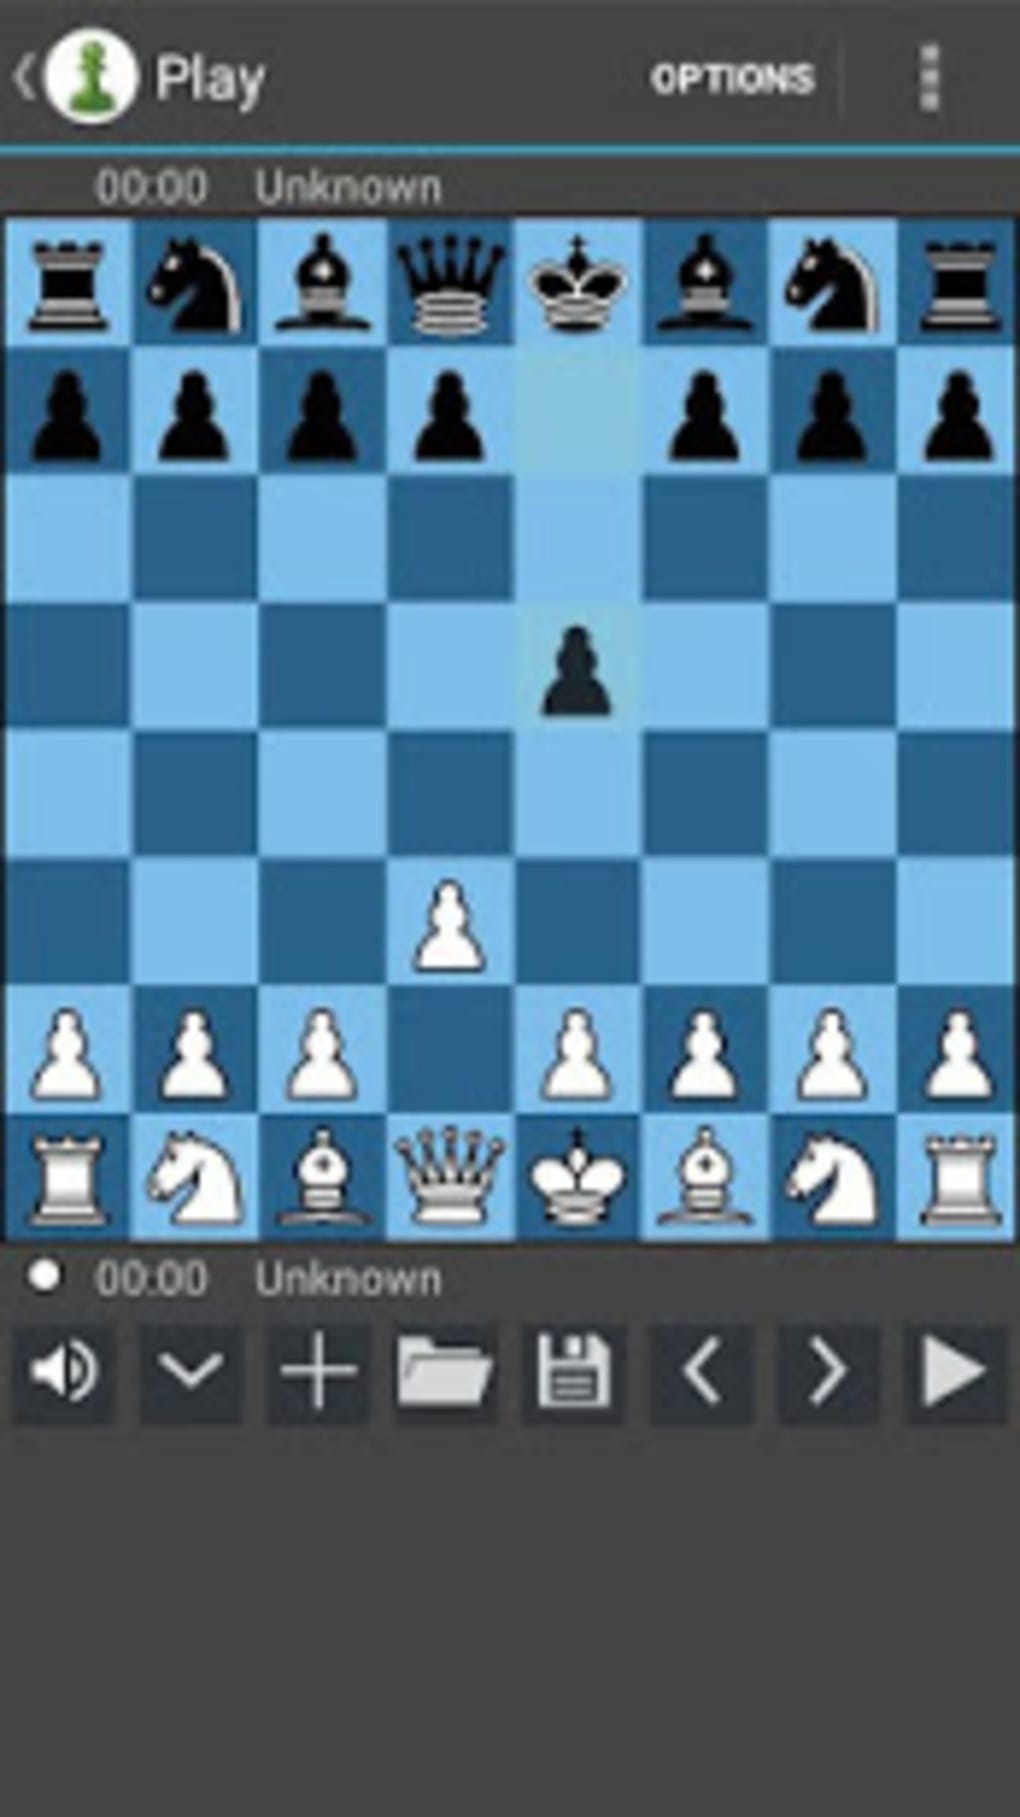 chess software for mac with friends